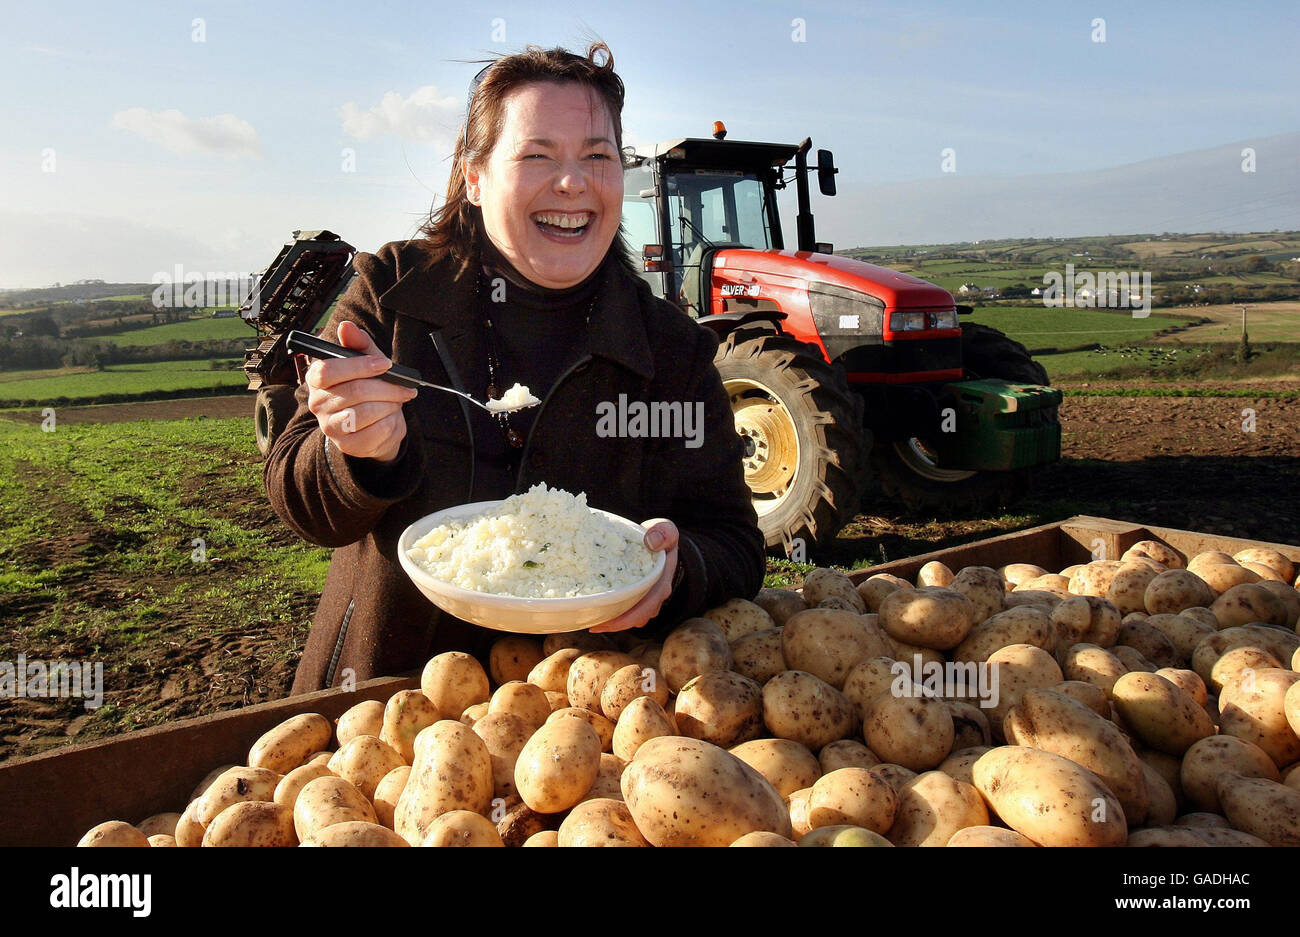 Agriculture and Rural Development Minister Michelle Gildernew MP MLA holds mashed potato during a visit to Mash Direct, a leading family-run agri-food business outside Comber, Co Down. Stock Photo